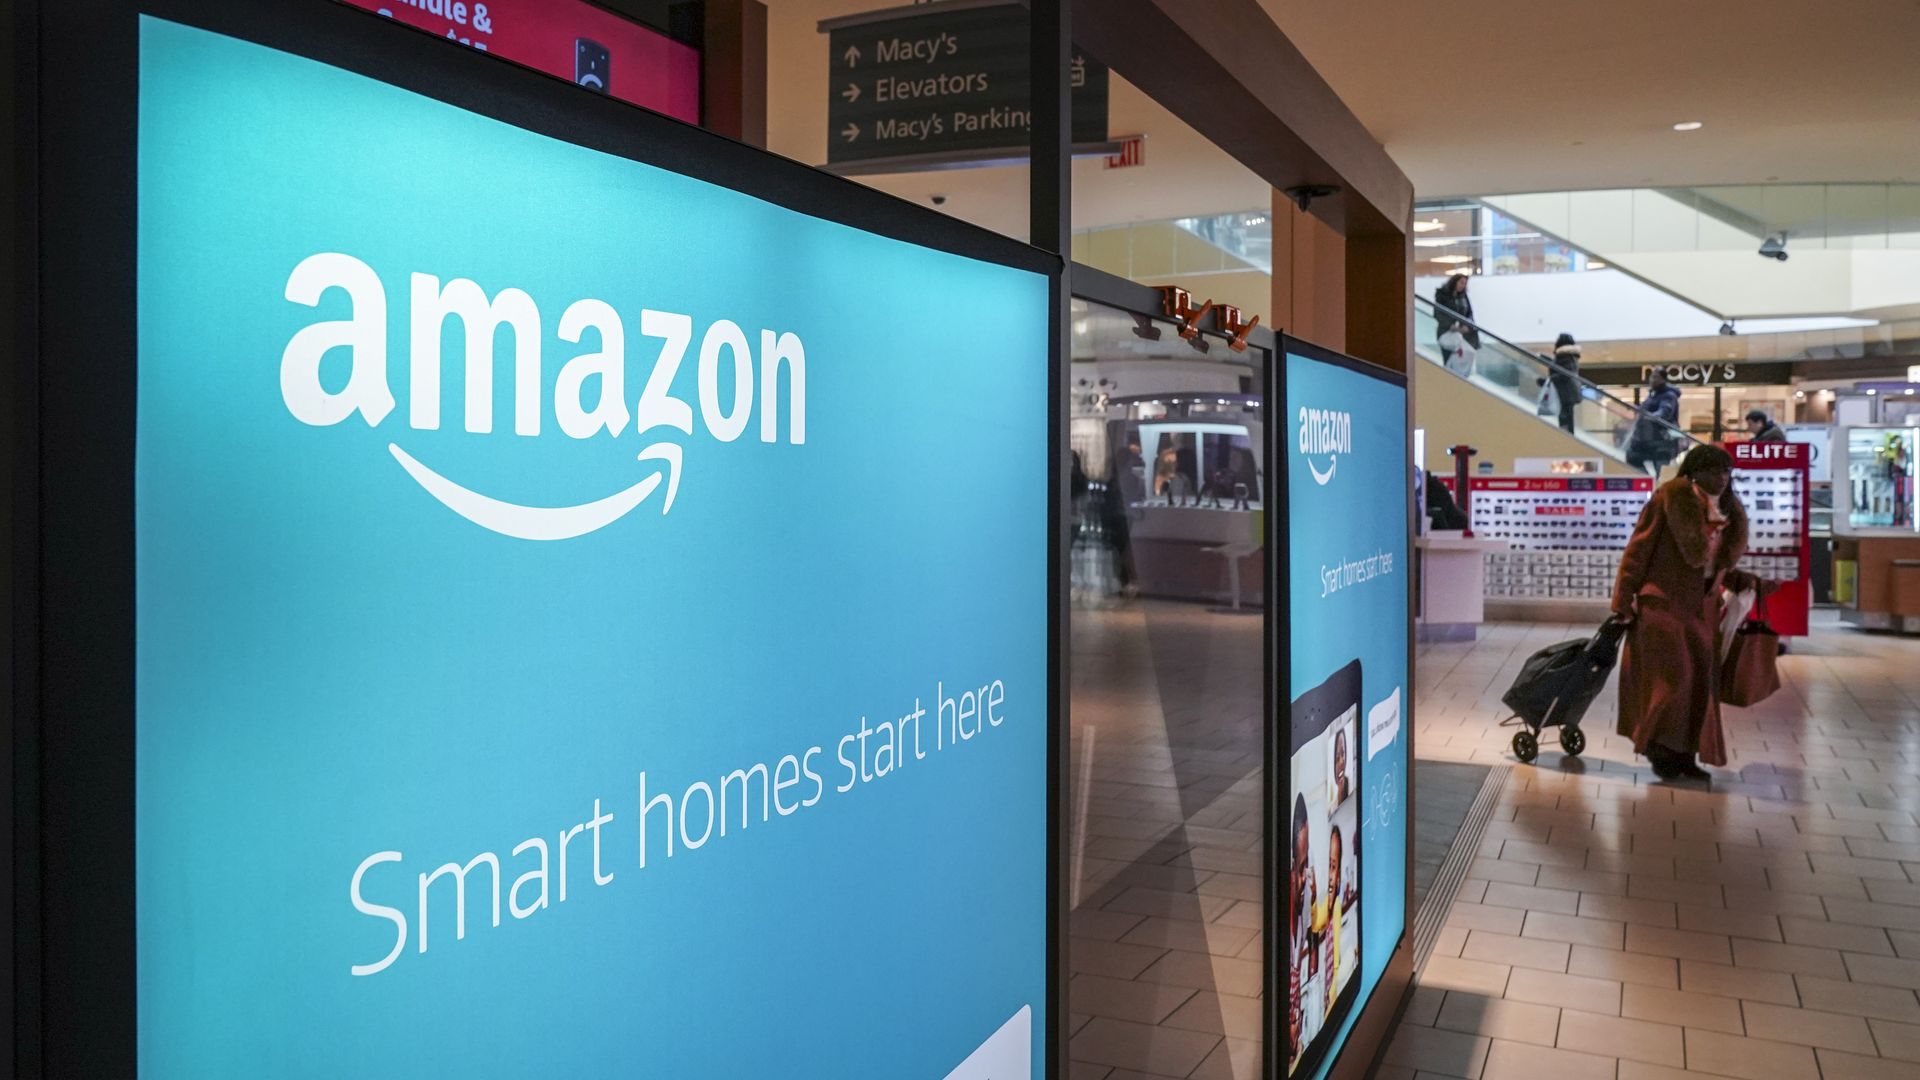 Amazon pop-up signs at the Queens Center Shopping Mall in New York